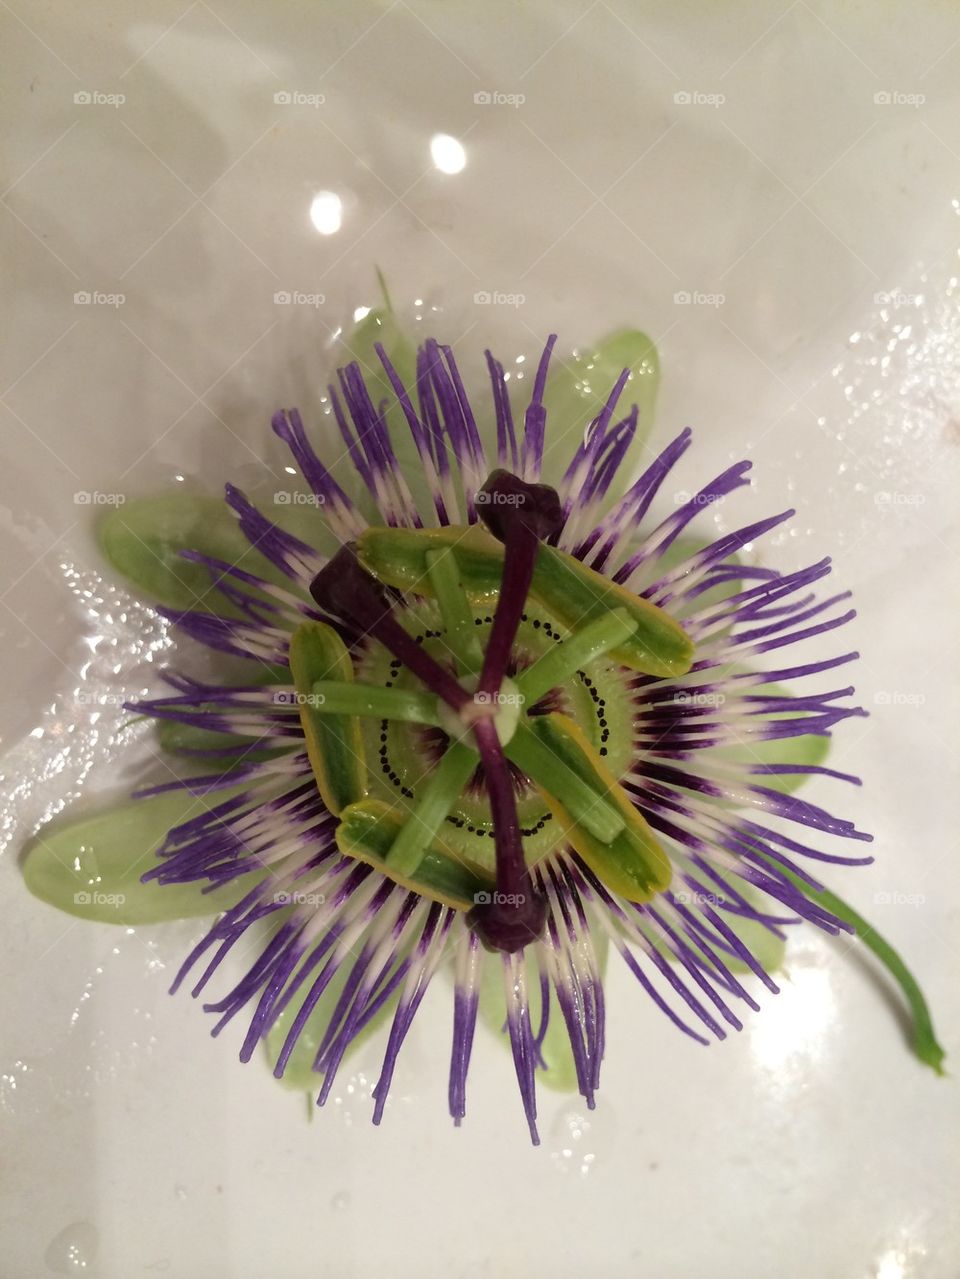 Floating passionflower